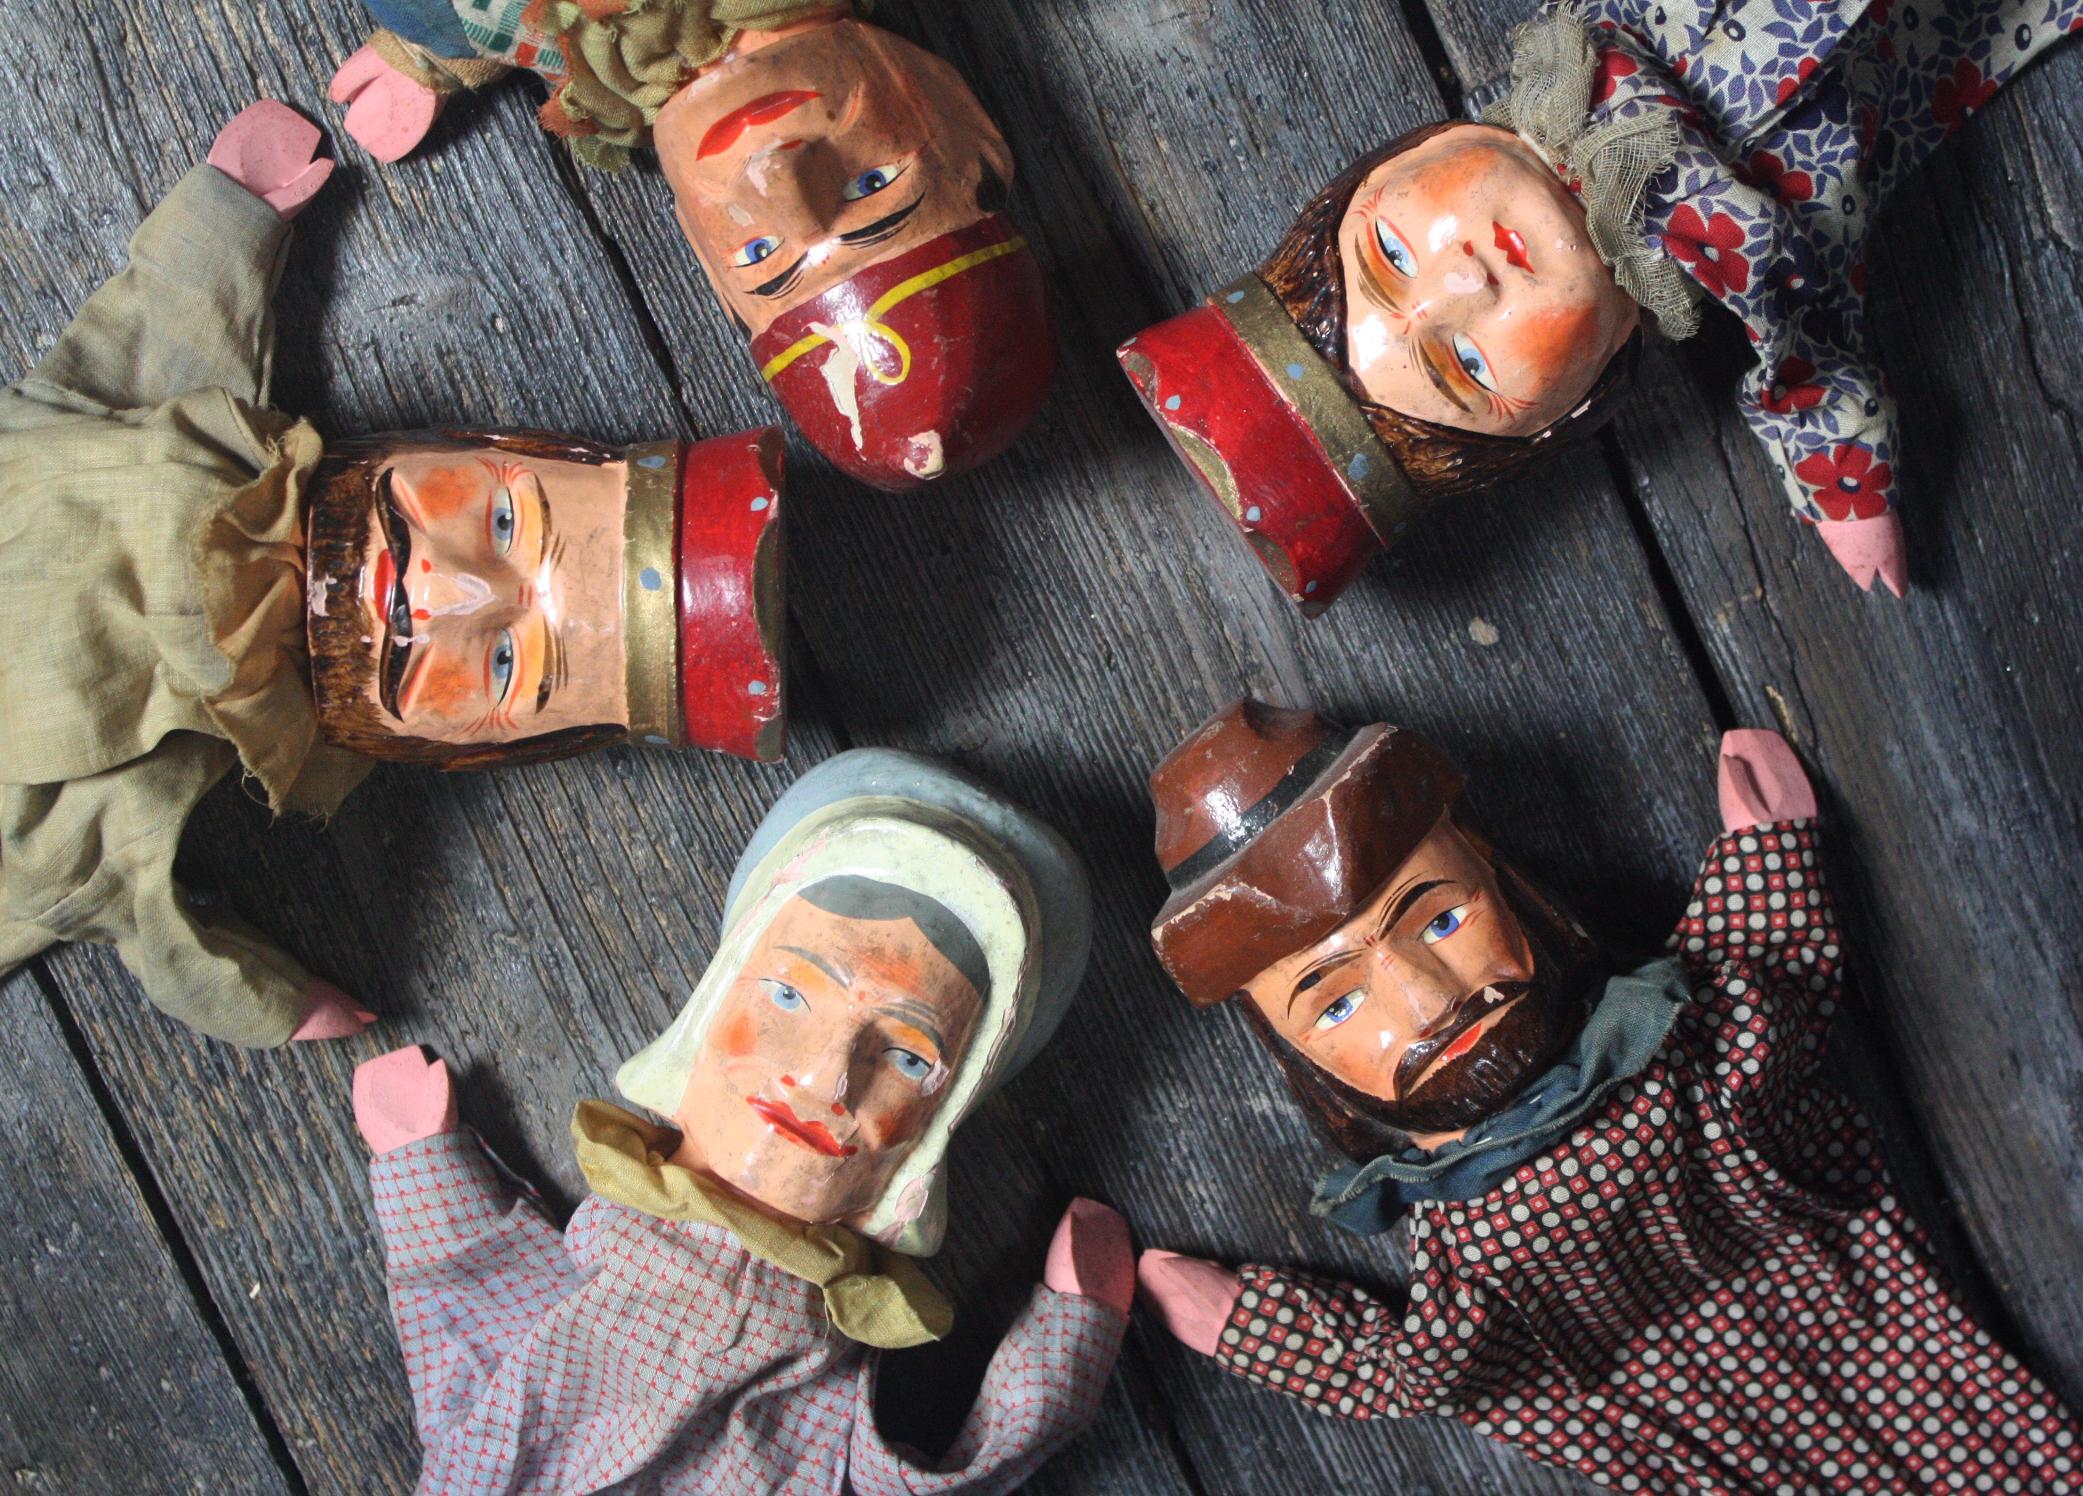 Collection of Early 20th Century German Punch & Judy Puppets Marionettes 3